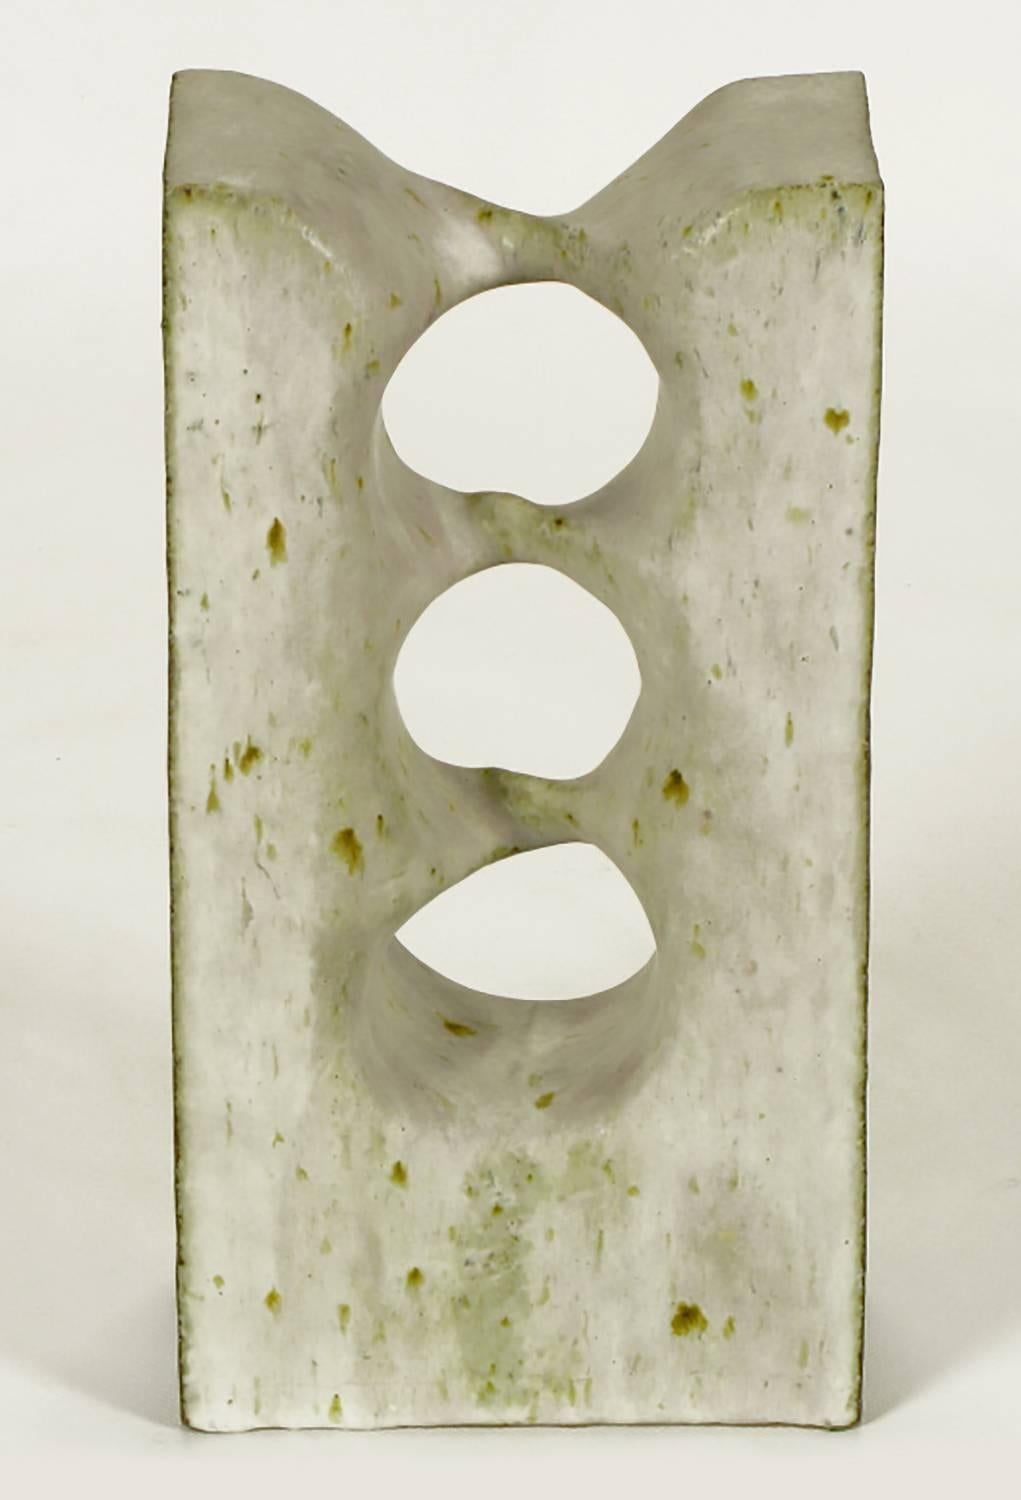 Japanese 1967 Double-Sided Abstract Ceramic Sculpture by Tomiya Matsuda (1939-2011)